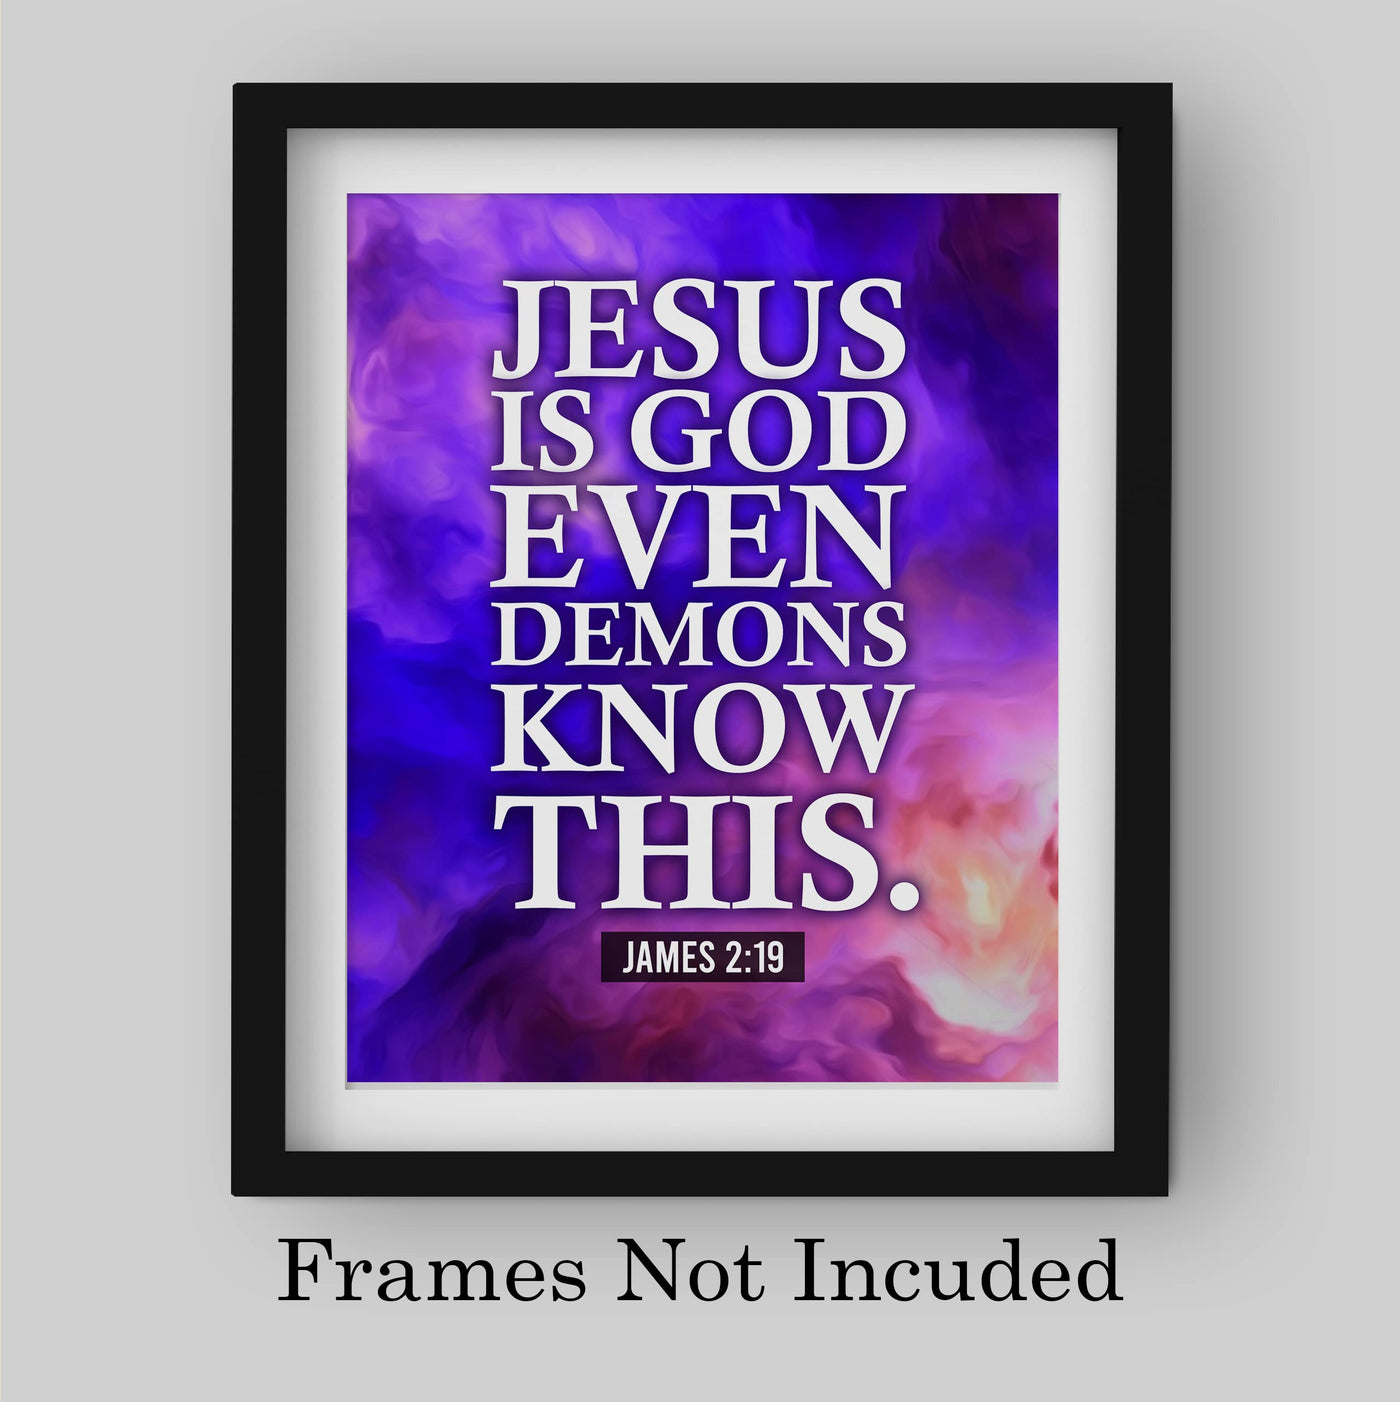 Jesus Is God-Even Demons Know This- Motivational Christian Wall Decor -8 x 10" Typographic Abstract Art Print-Ready to Frame. Religious Home-Office-Church-School Decor. Great Inspirational Gift!